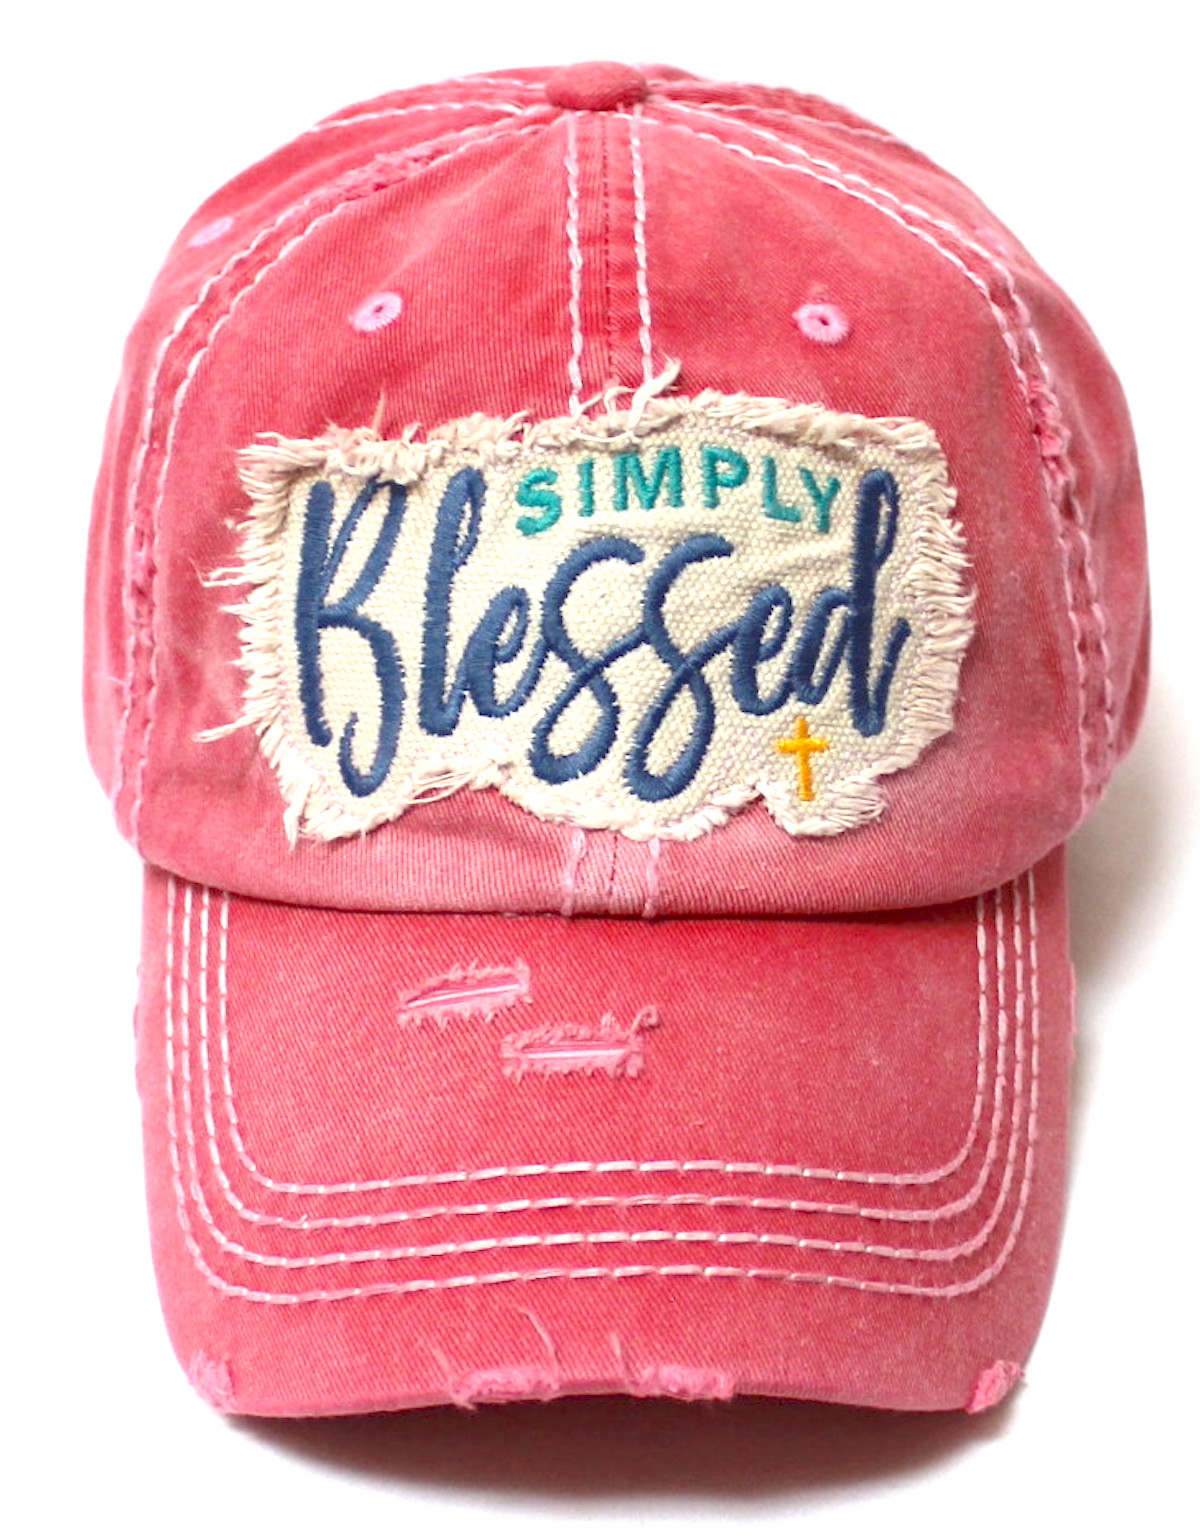 SimplyBlessed_Pin_Front